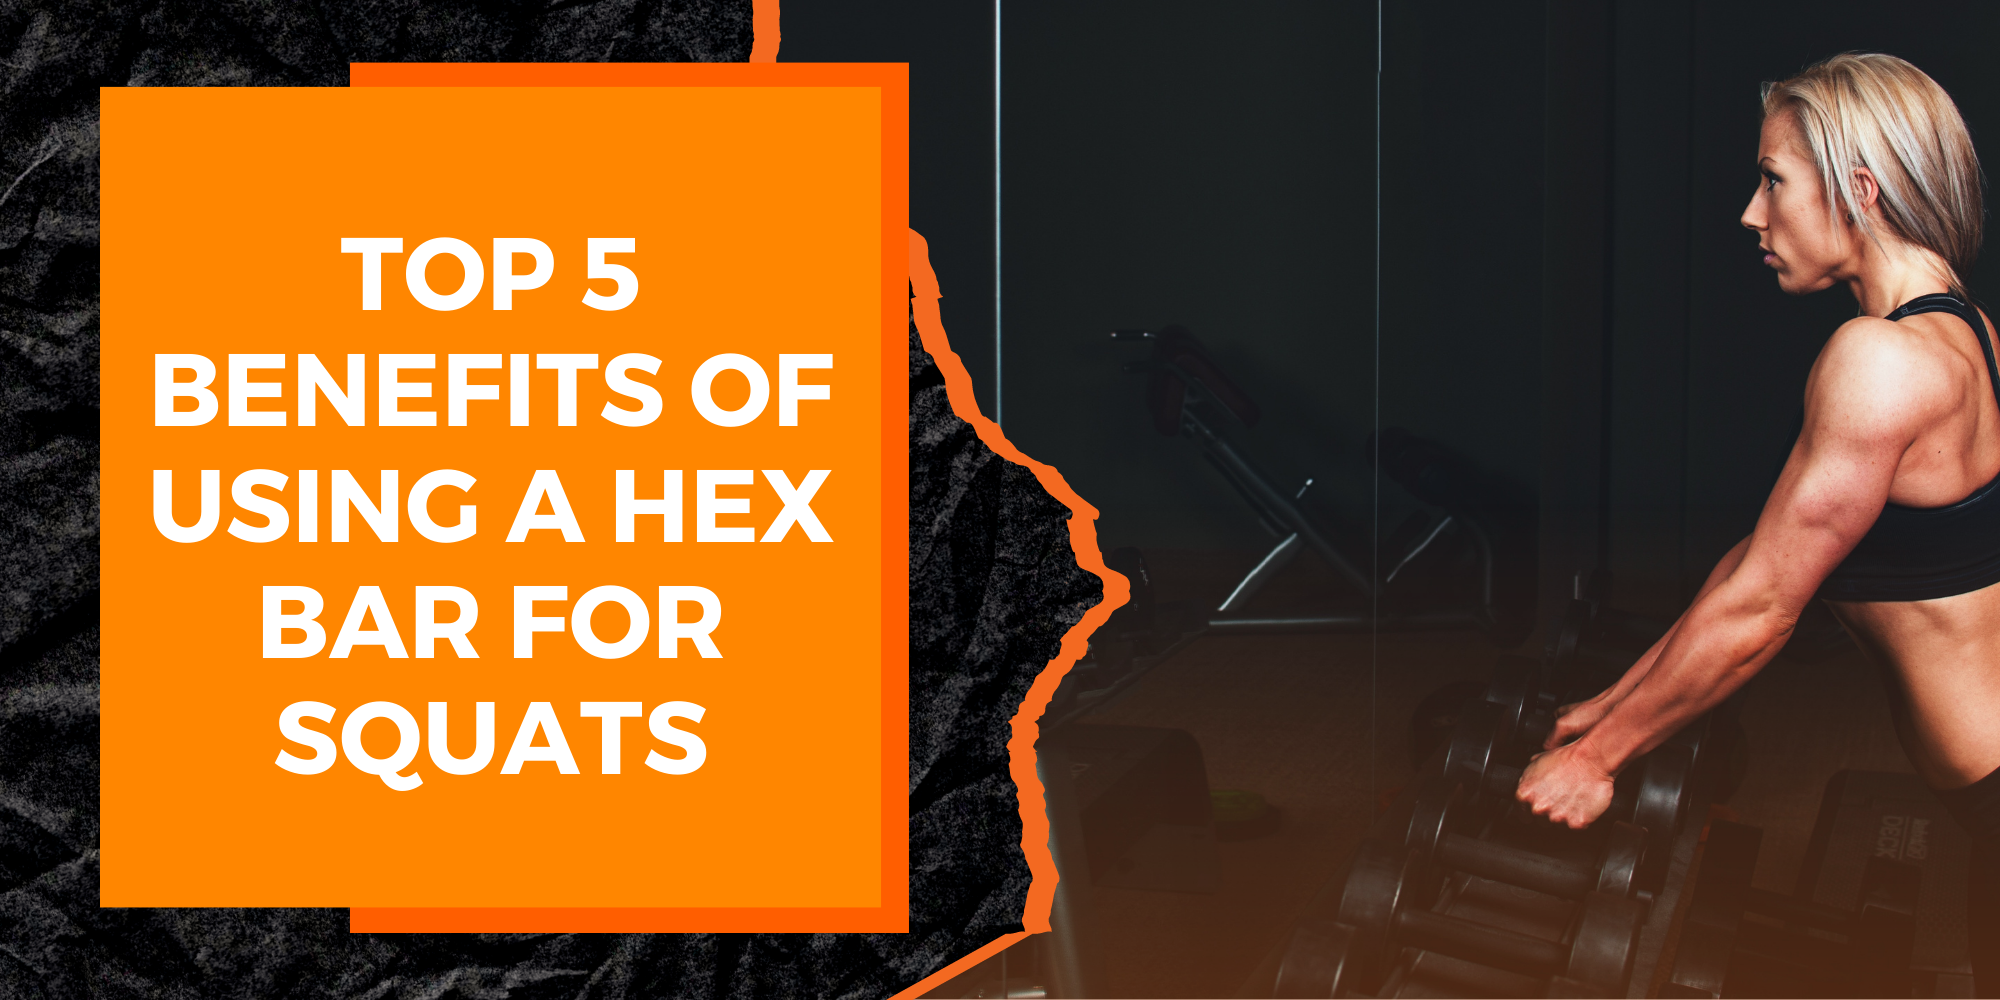 The Top 5 Benefits of Using a Hex Bar for Squats